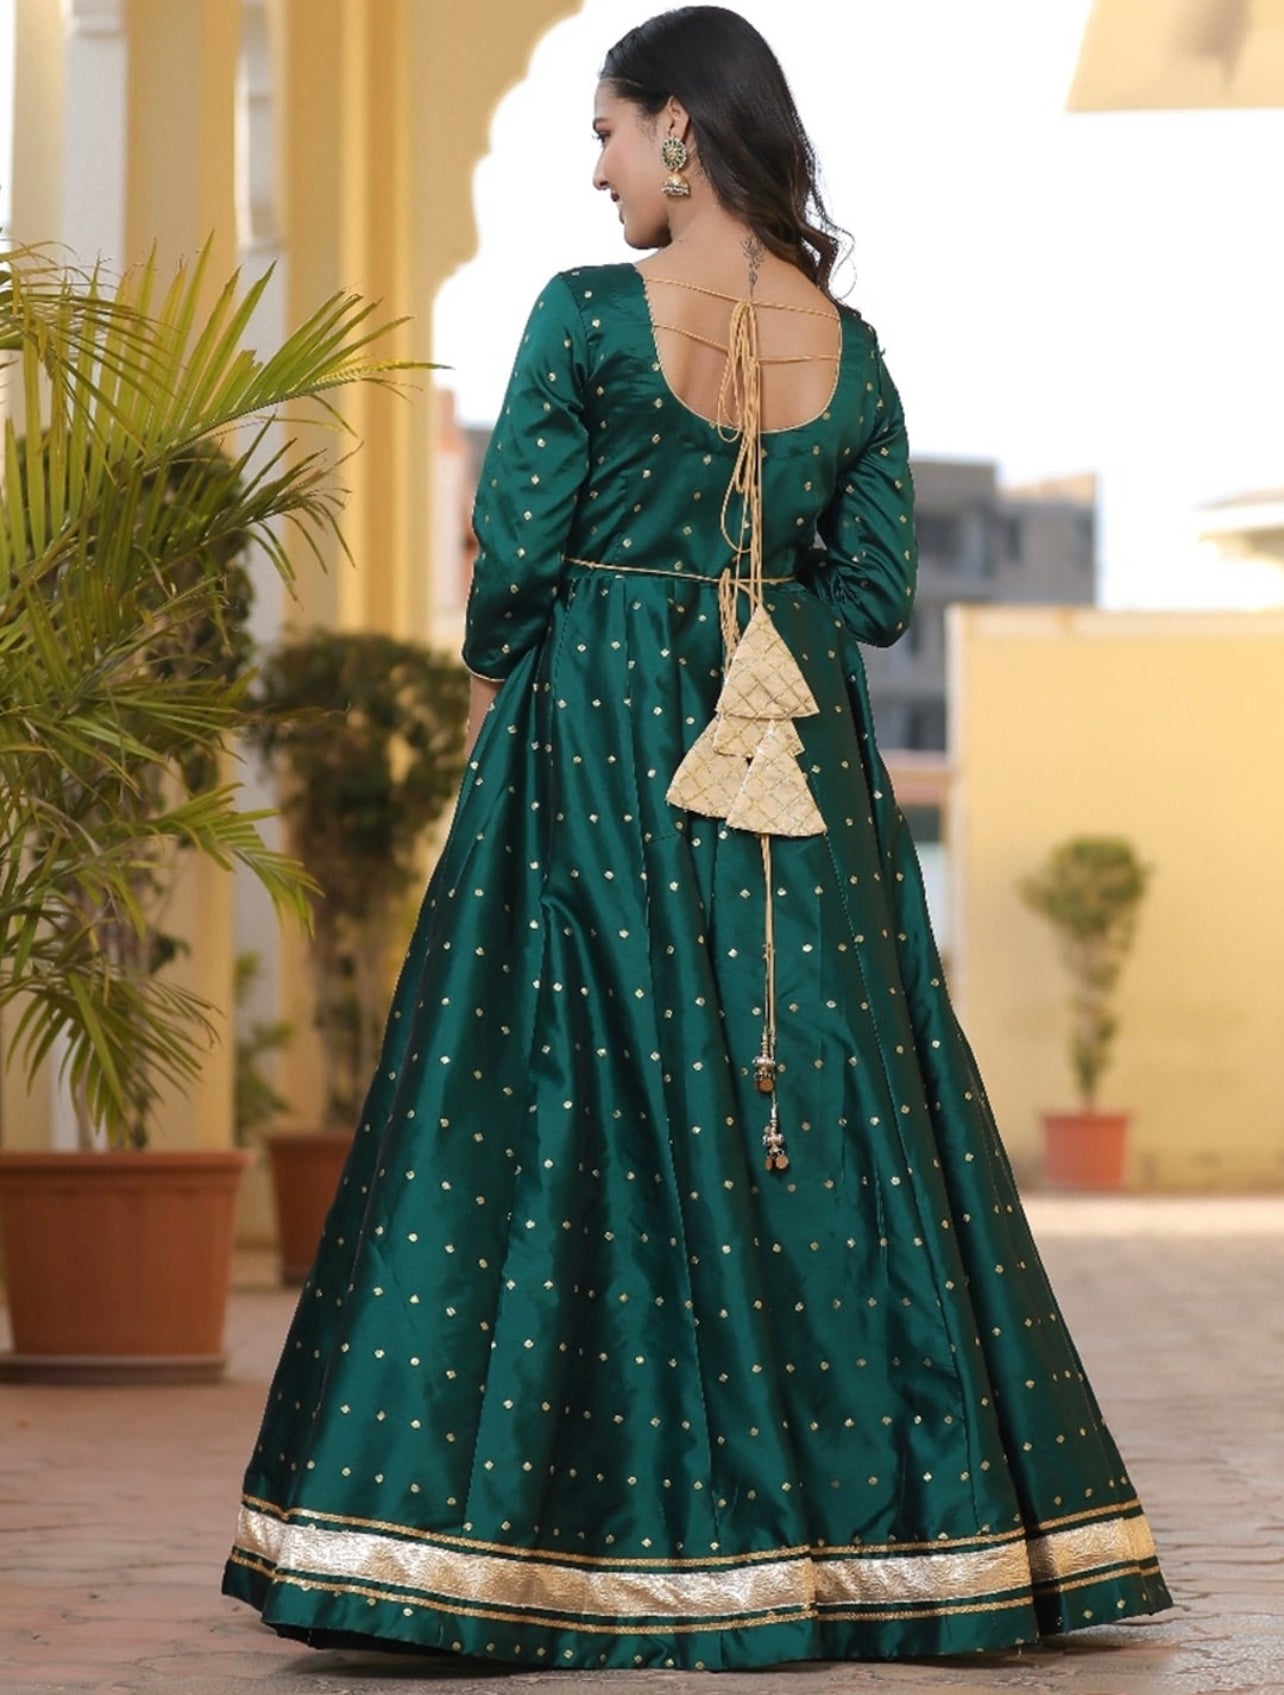 Green Ethnic Maxi Gown with Embbellished Belt